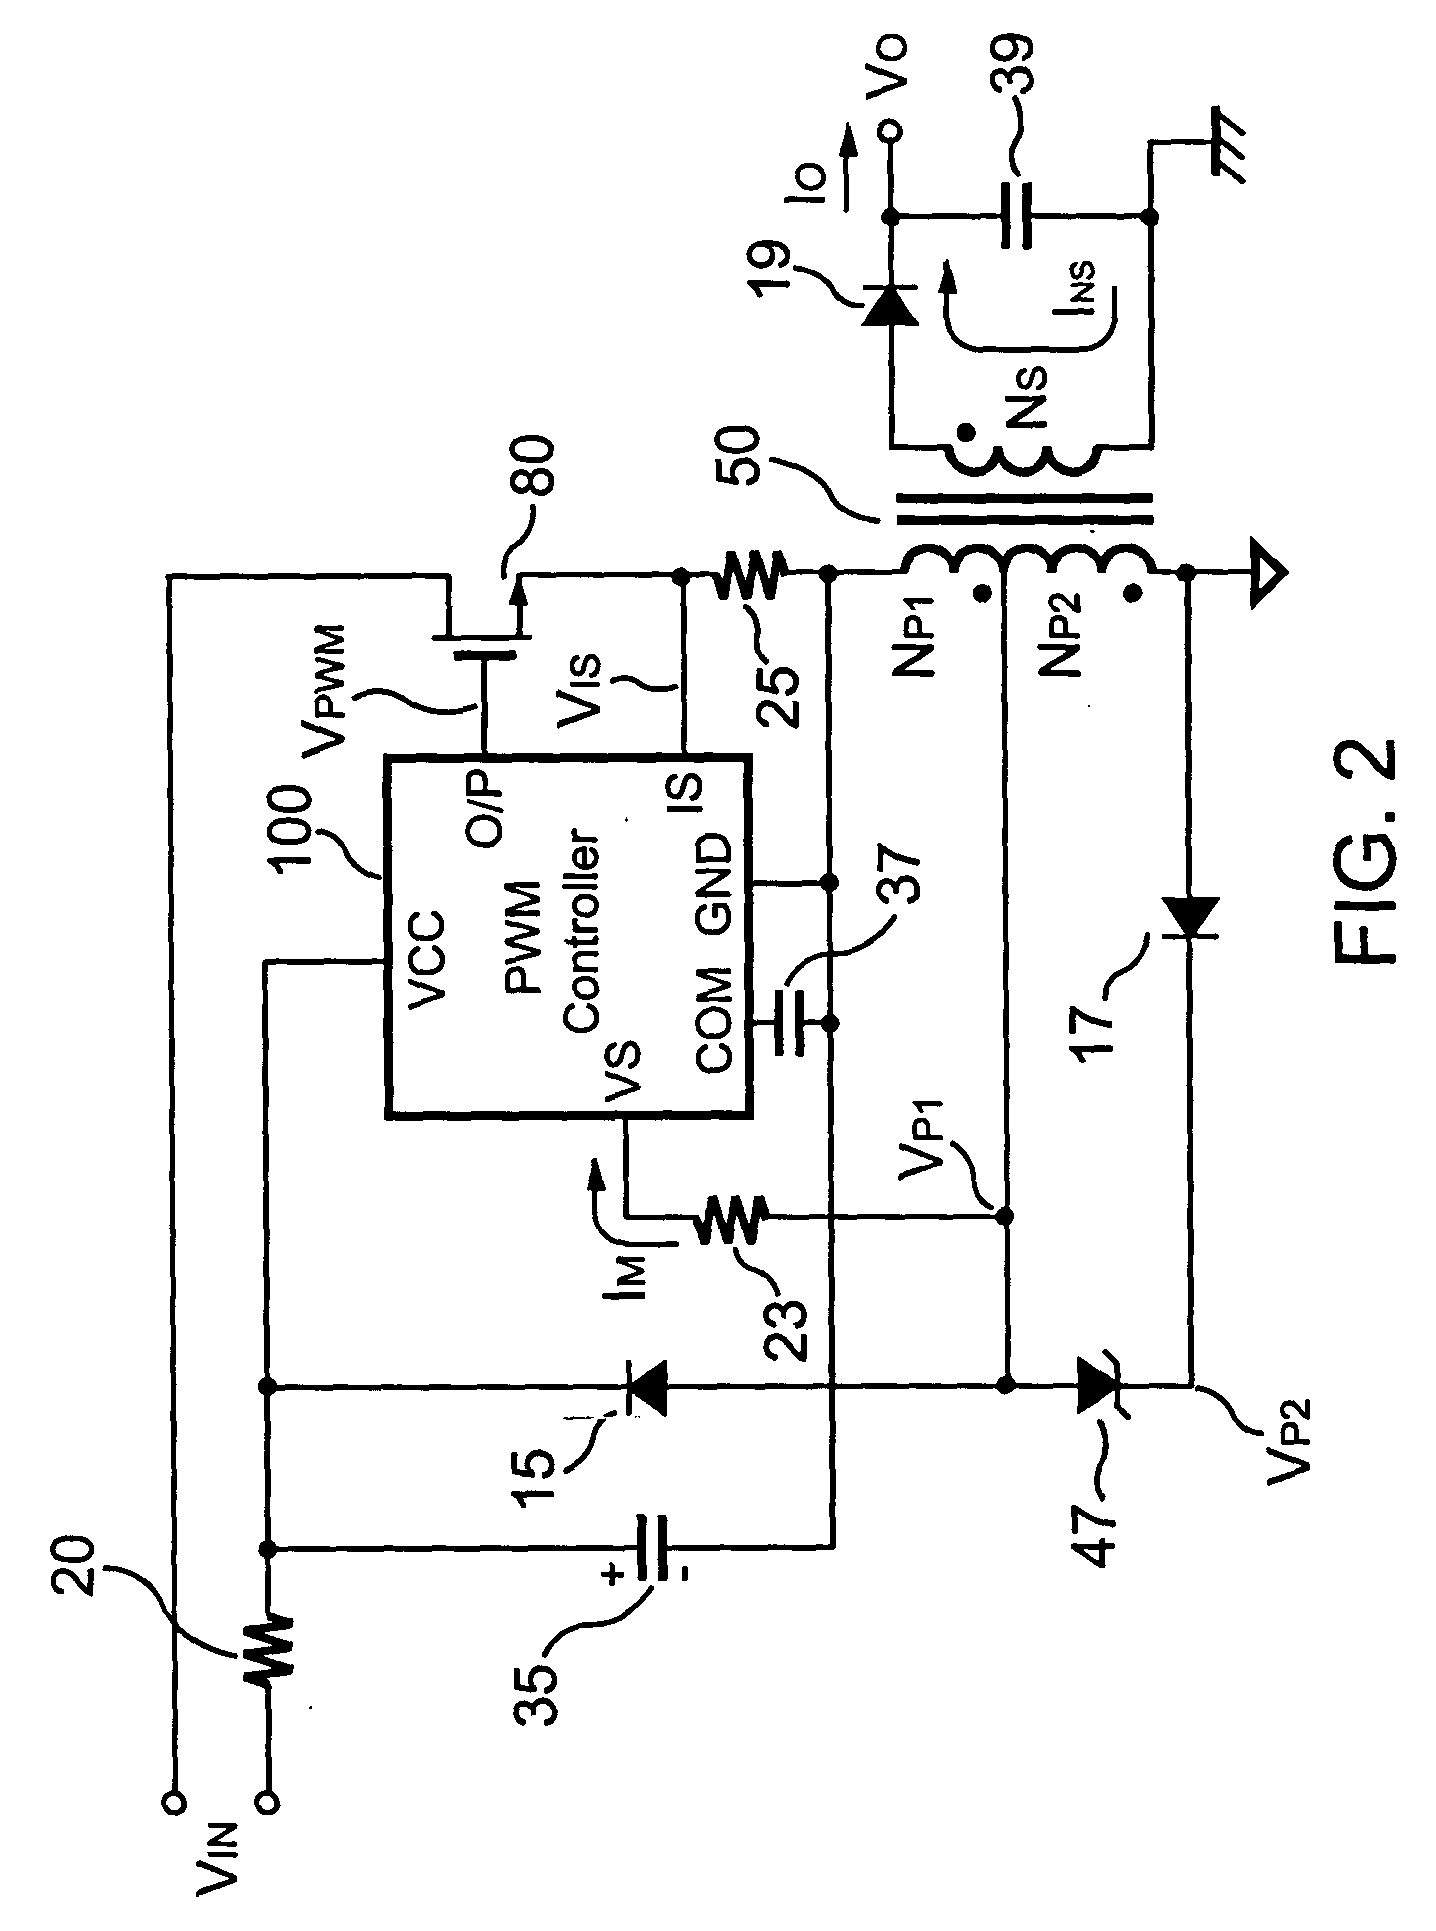 Primary-side controlled flyback power converter